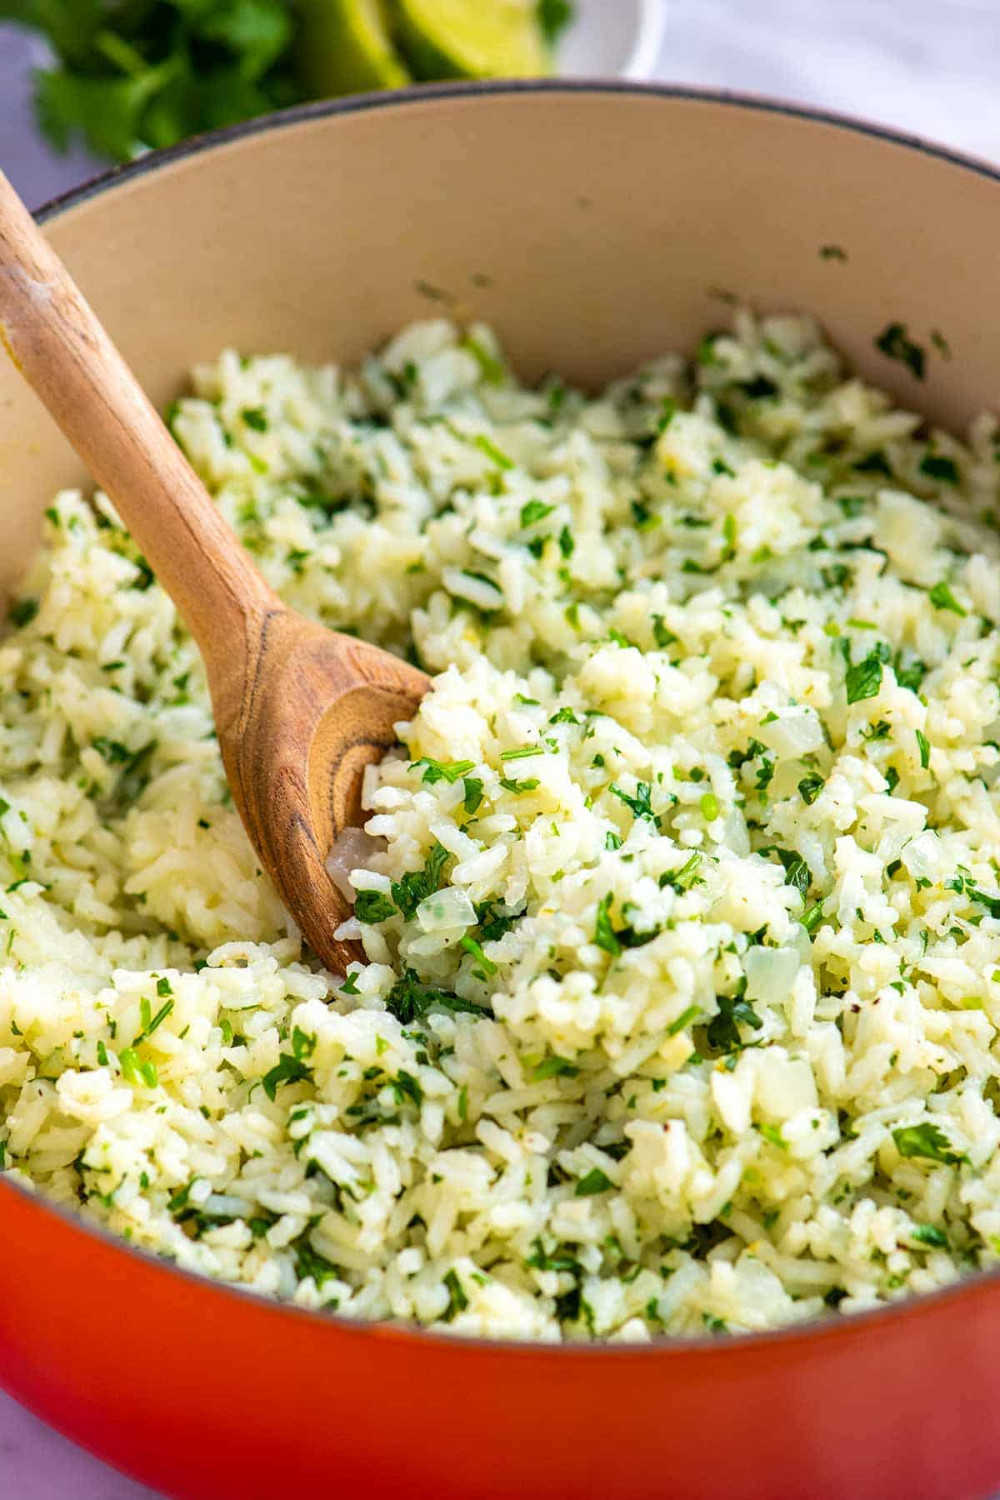 Qdoba Mexican Eats Cilantro Lime Rice
 Perfect Cilantro Lime Rice Recipe With images